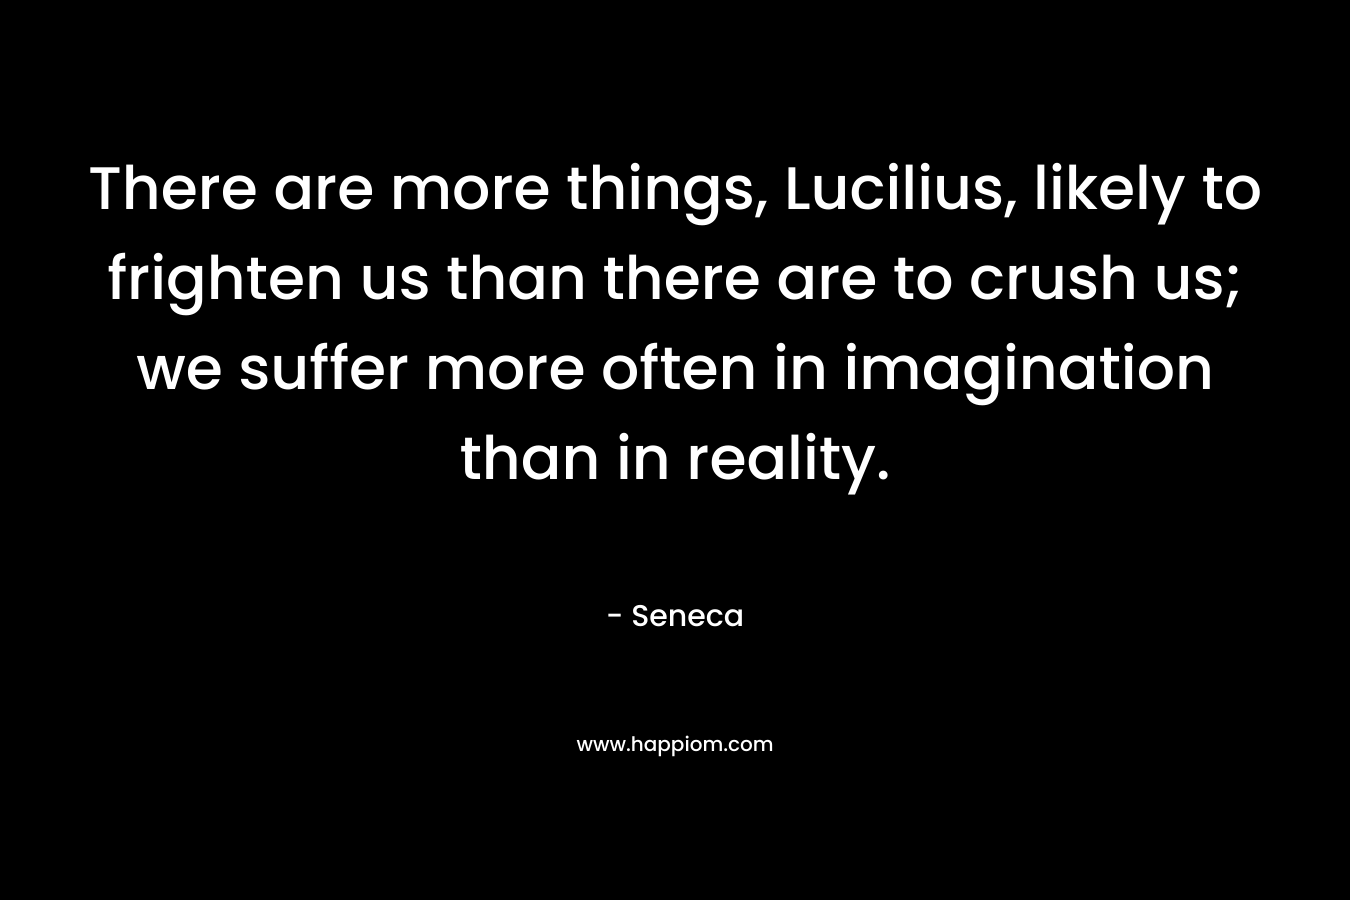 There are more things, Lucilius, likely to frighten us than there are to crush us; we suffer more often in imagination than in reality. – Seneca